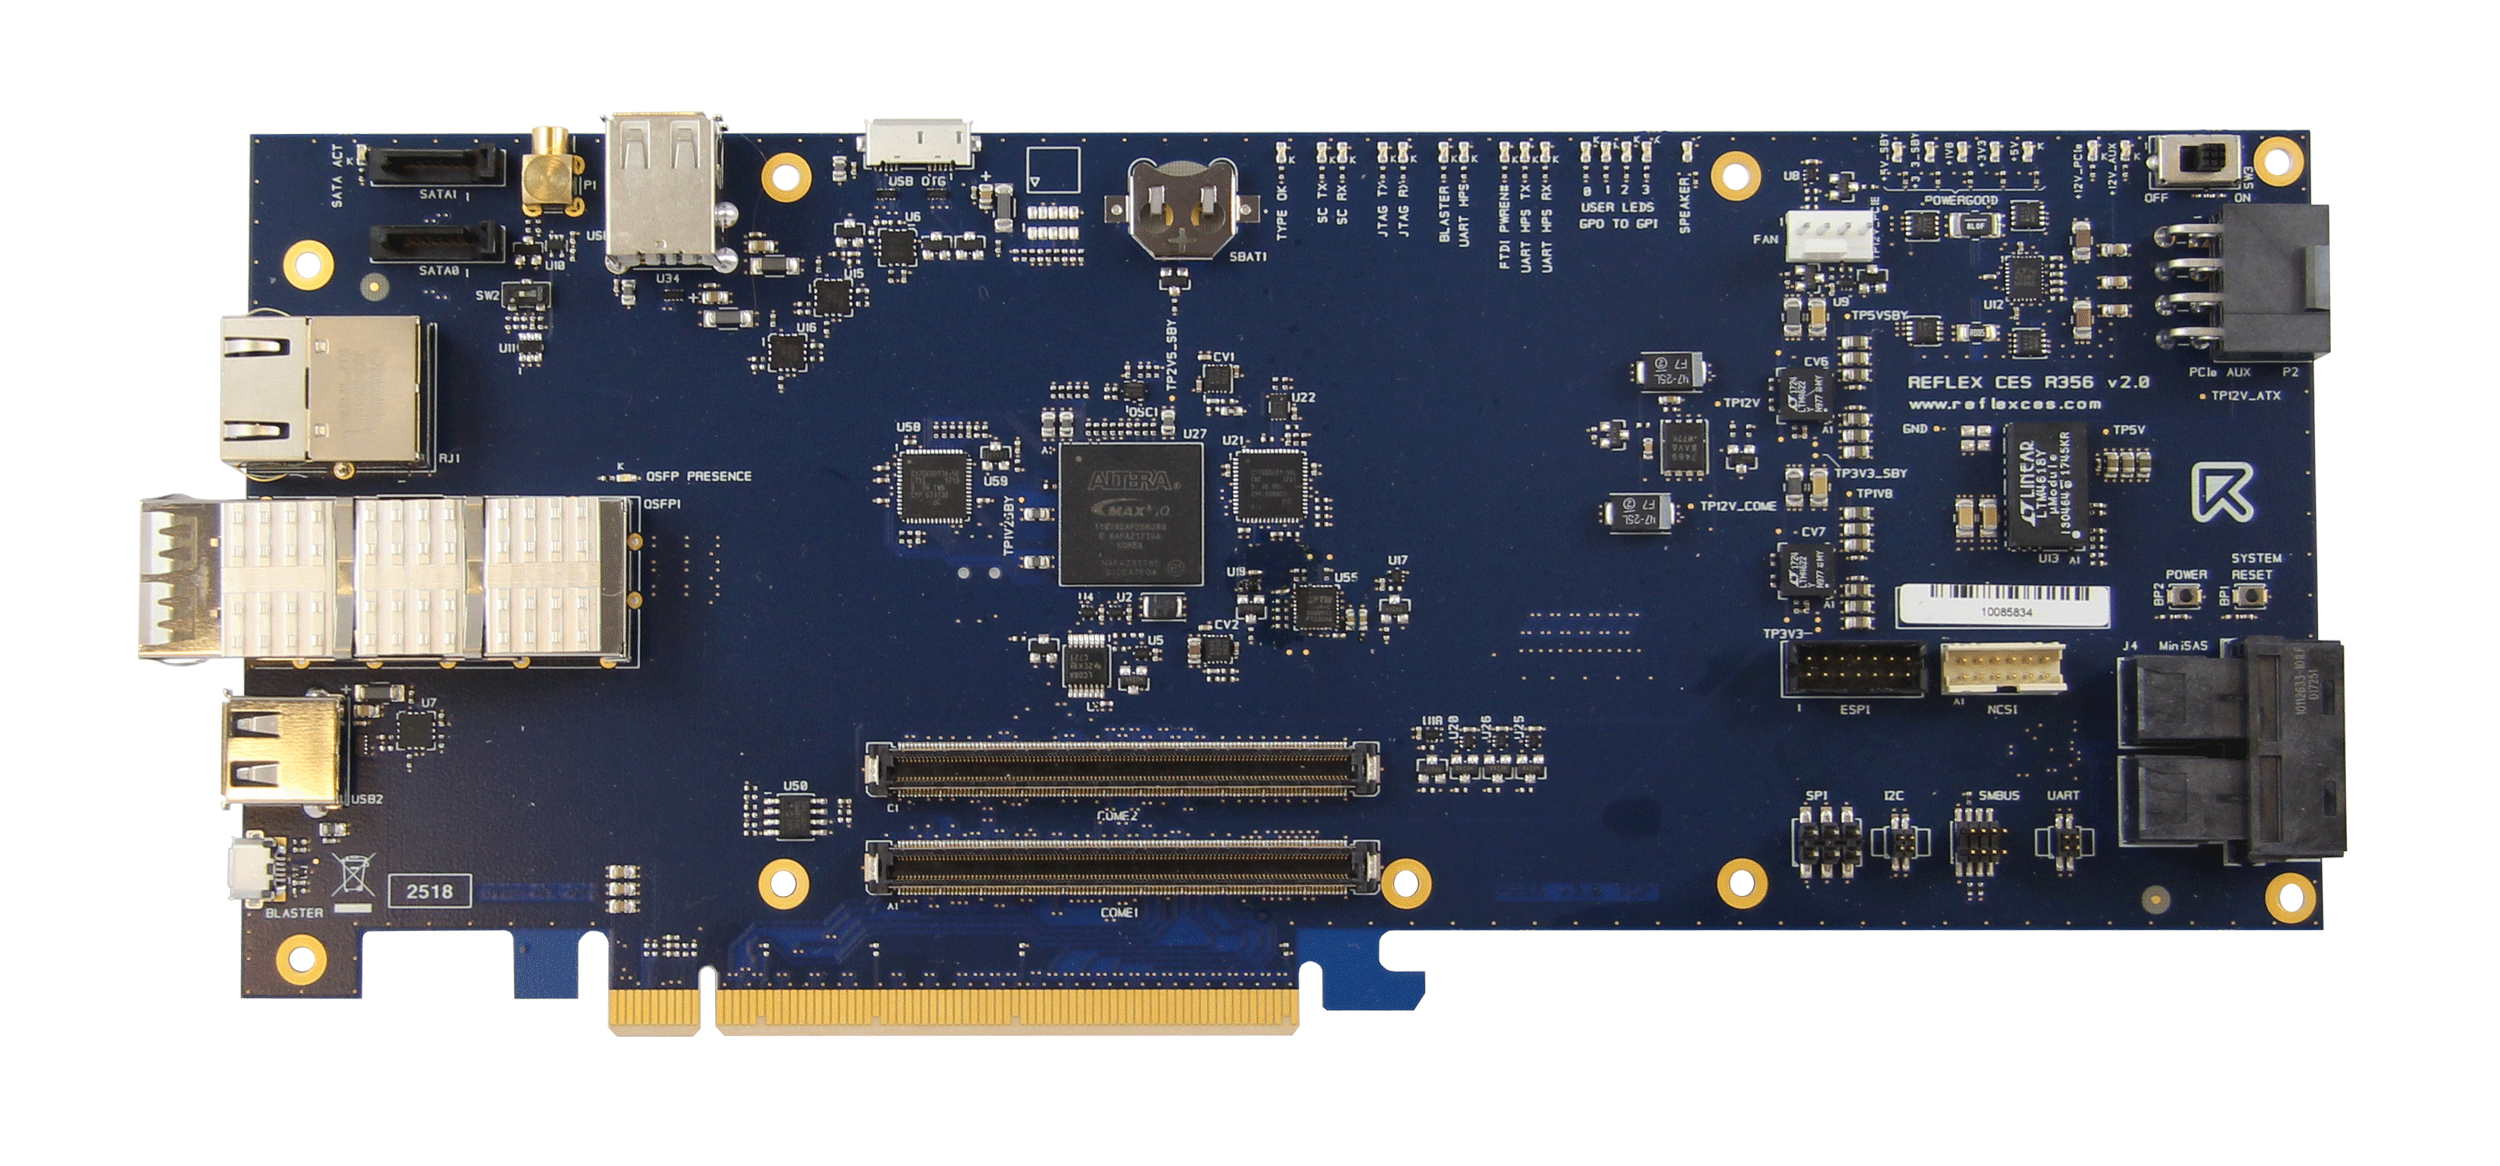 COMXpress PCIe carrier board